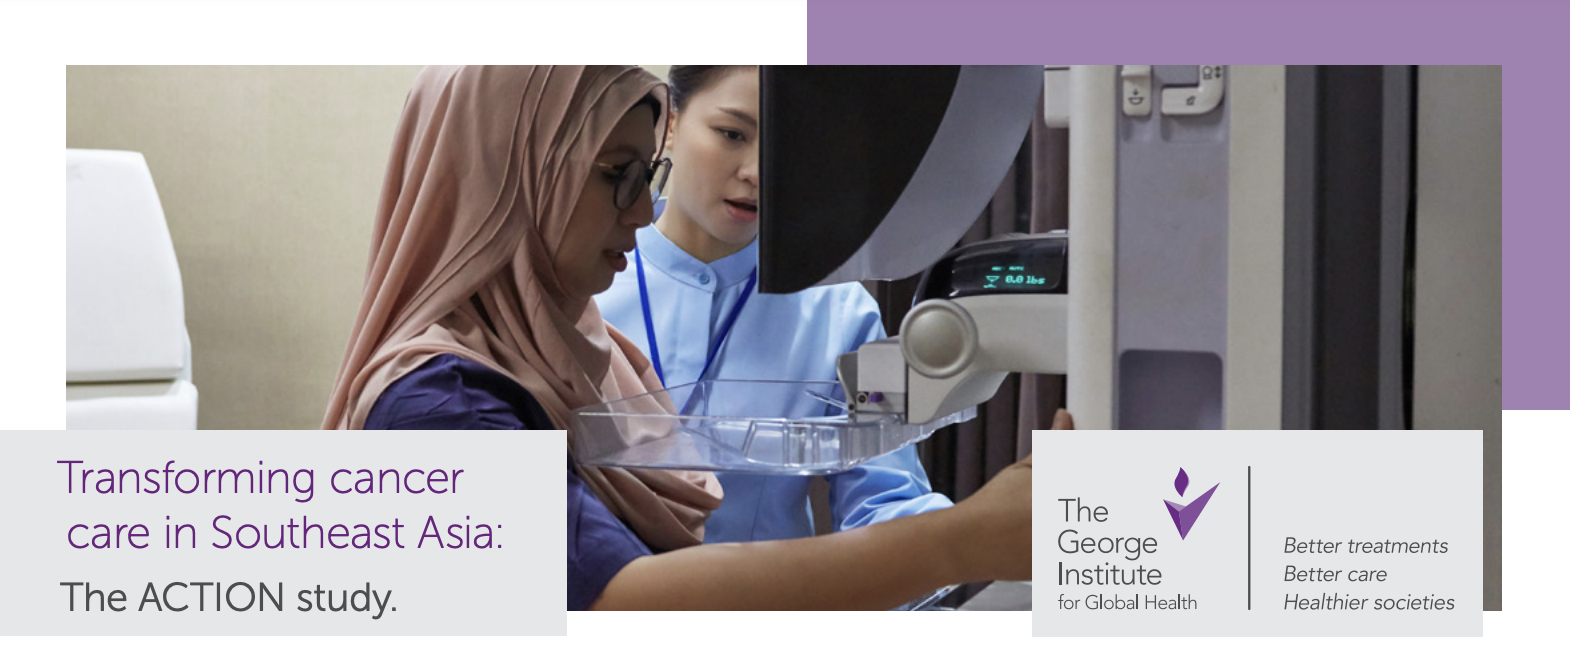 Improving Cancer Care in South East Asia: The ACTION Case Study